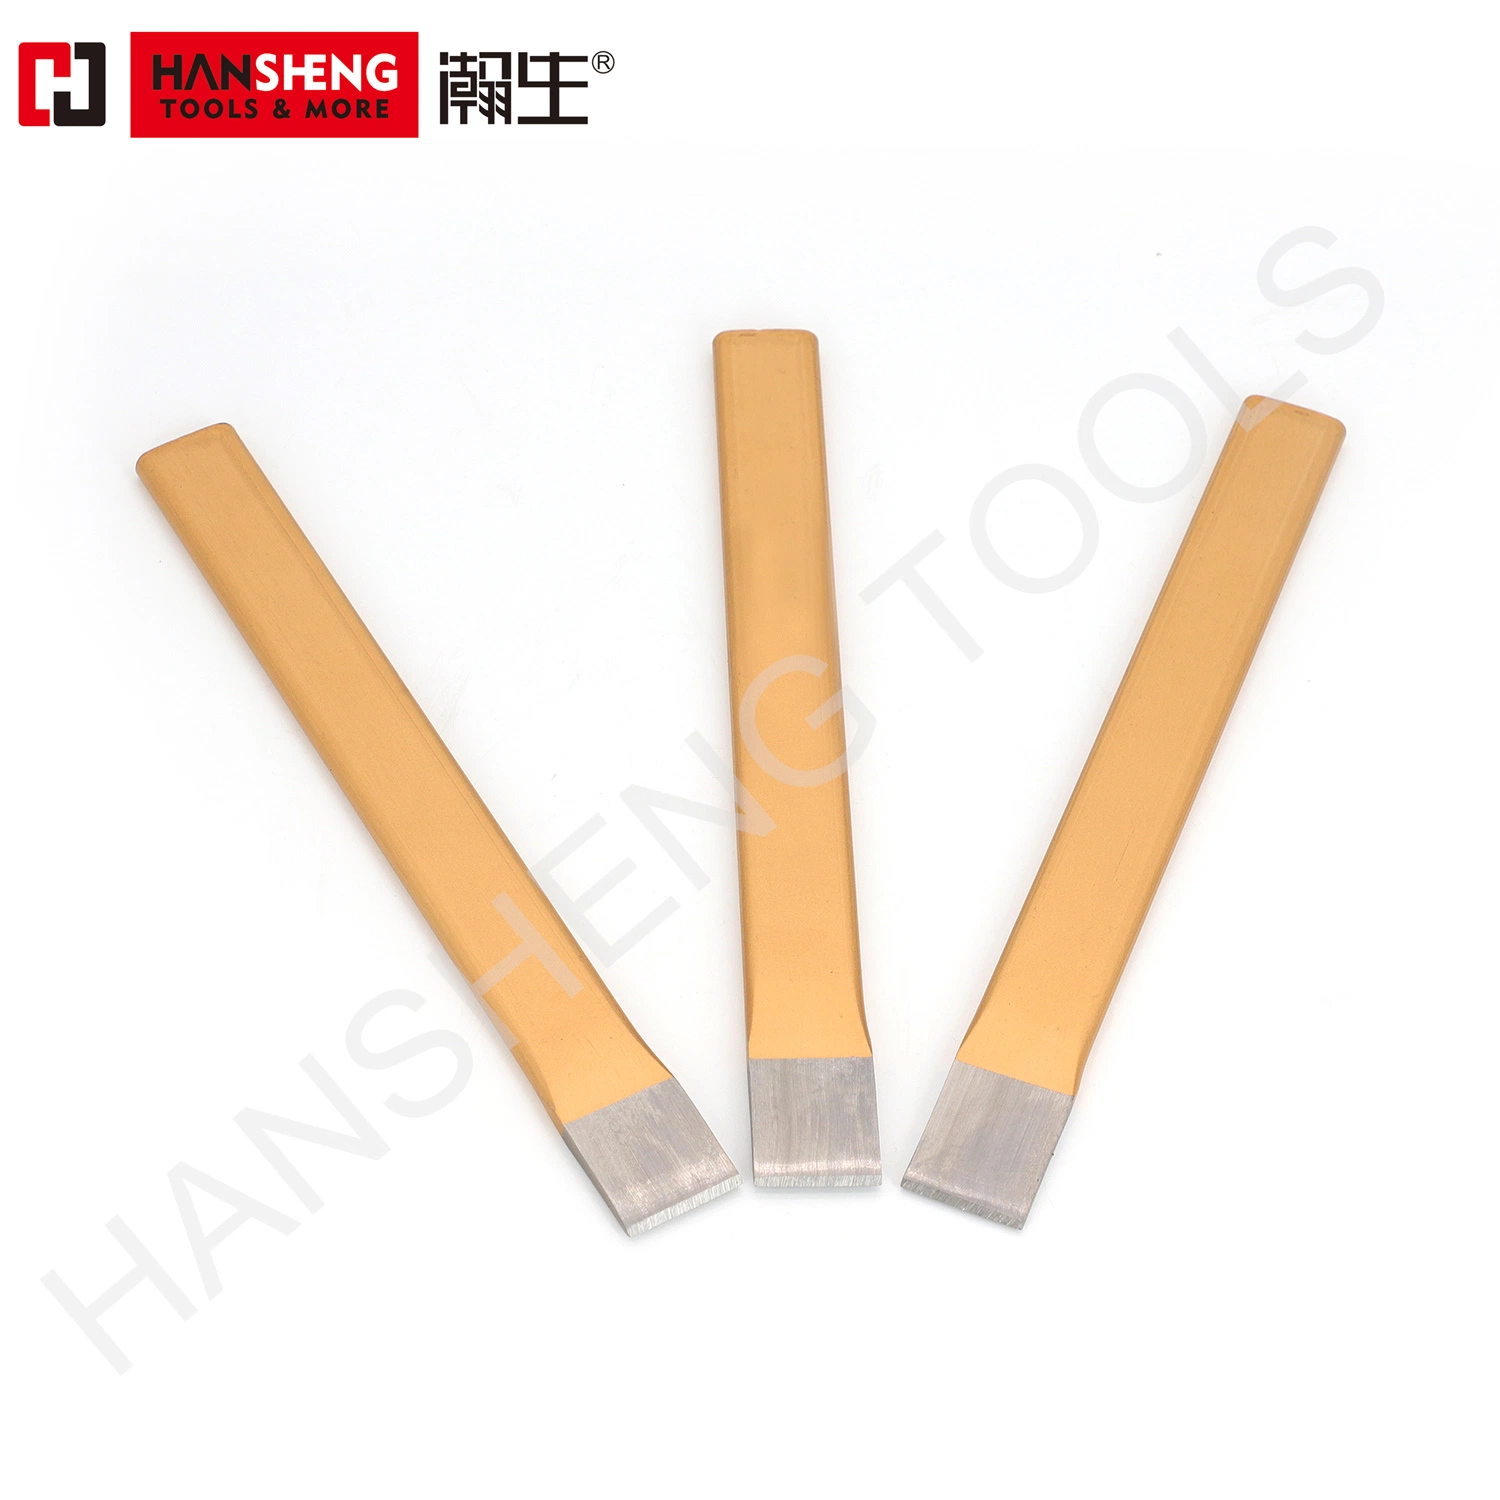 Profession Chisel, Demolition Tools, Hand Tool, Hardware Tool, Chisel Bit, High Quality, Hydraulic Breaker Chisel, for Concrete, Natural or Artificial Stone Ect